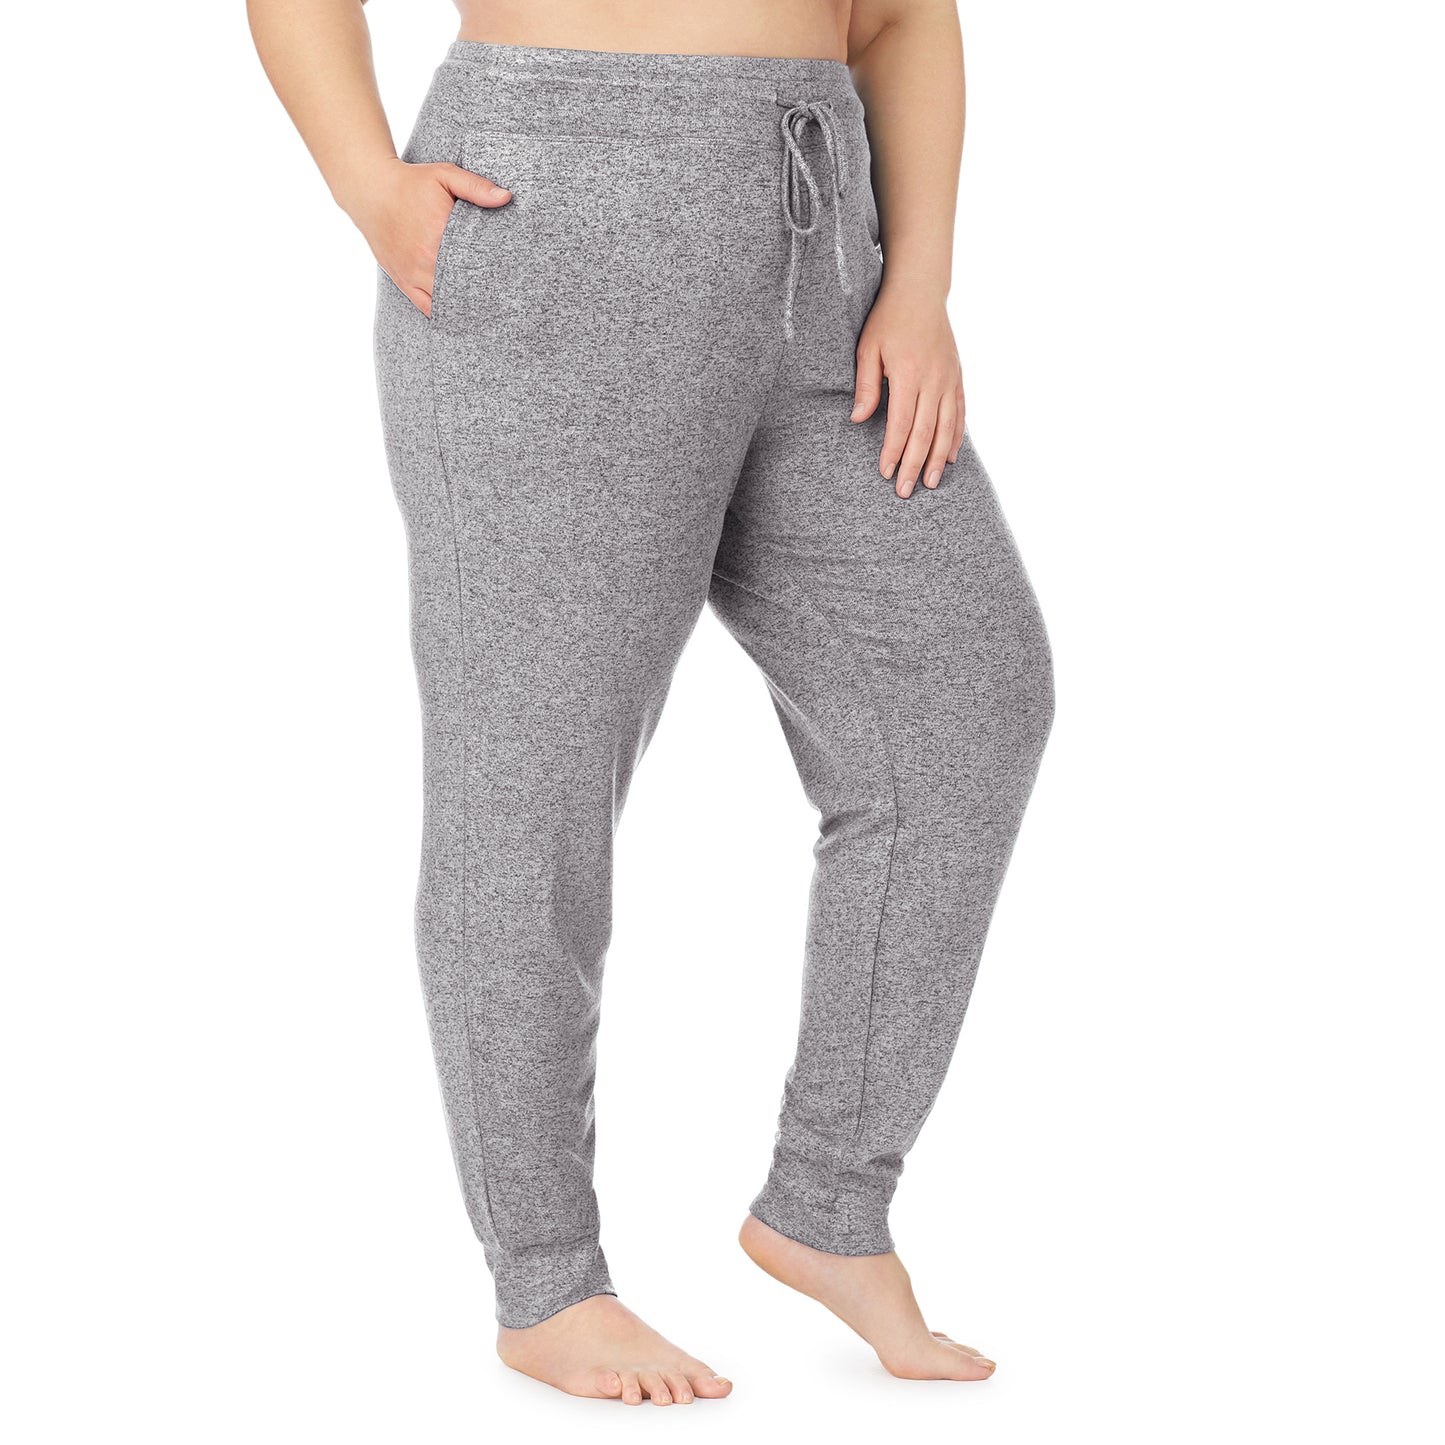 Marled Grey; Model is wearing size 1X. She is 5'9", Bust 38", Waist 36", Hips 48.5". @A lady wearing a marled grey jogger plus.